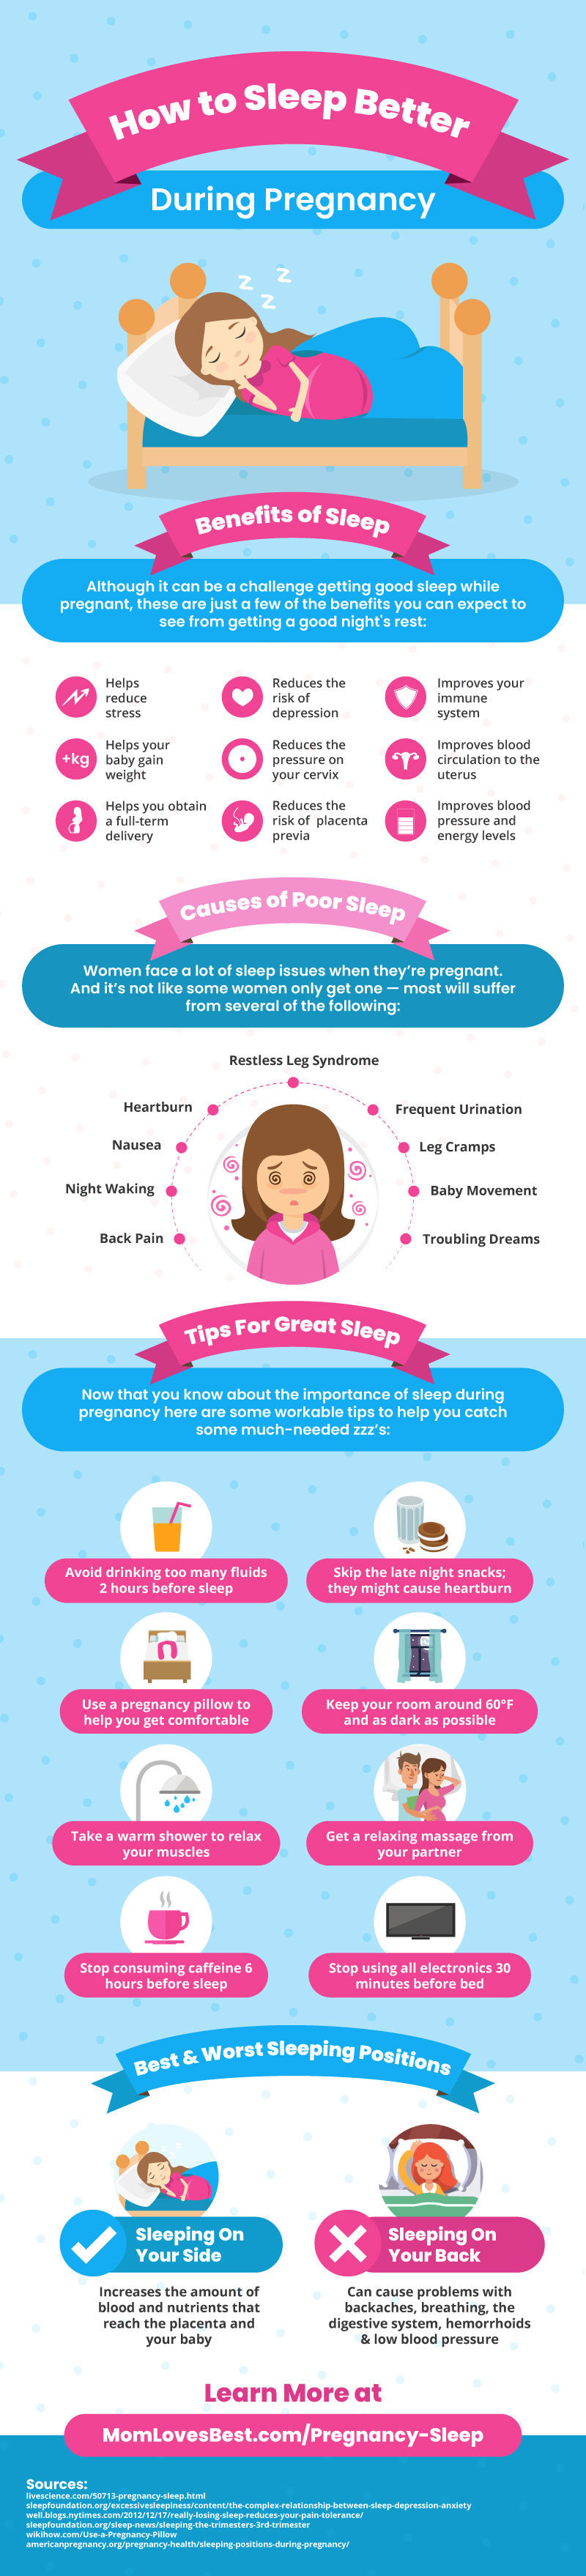 How to Sleep better during Pregnancy [Infographic] | ecogreenlove